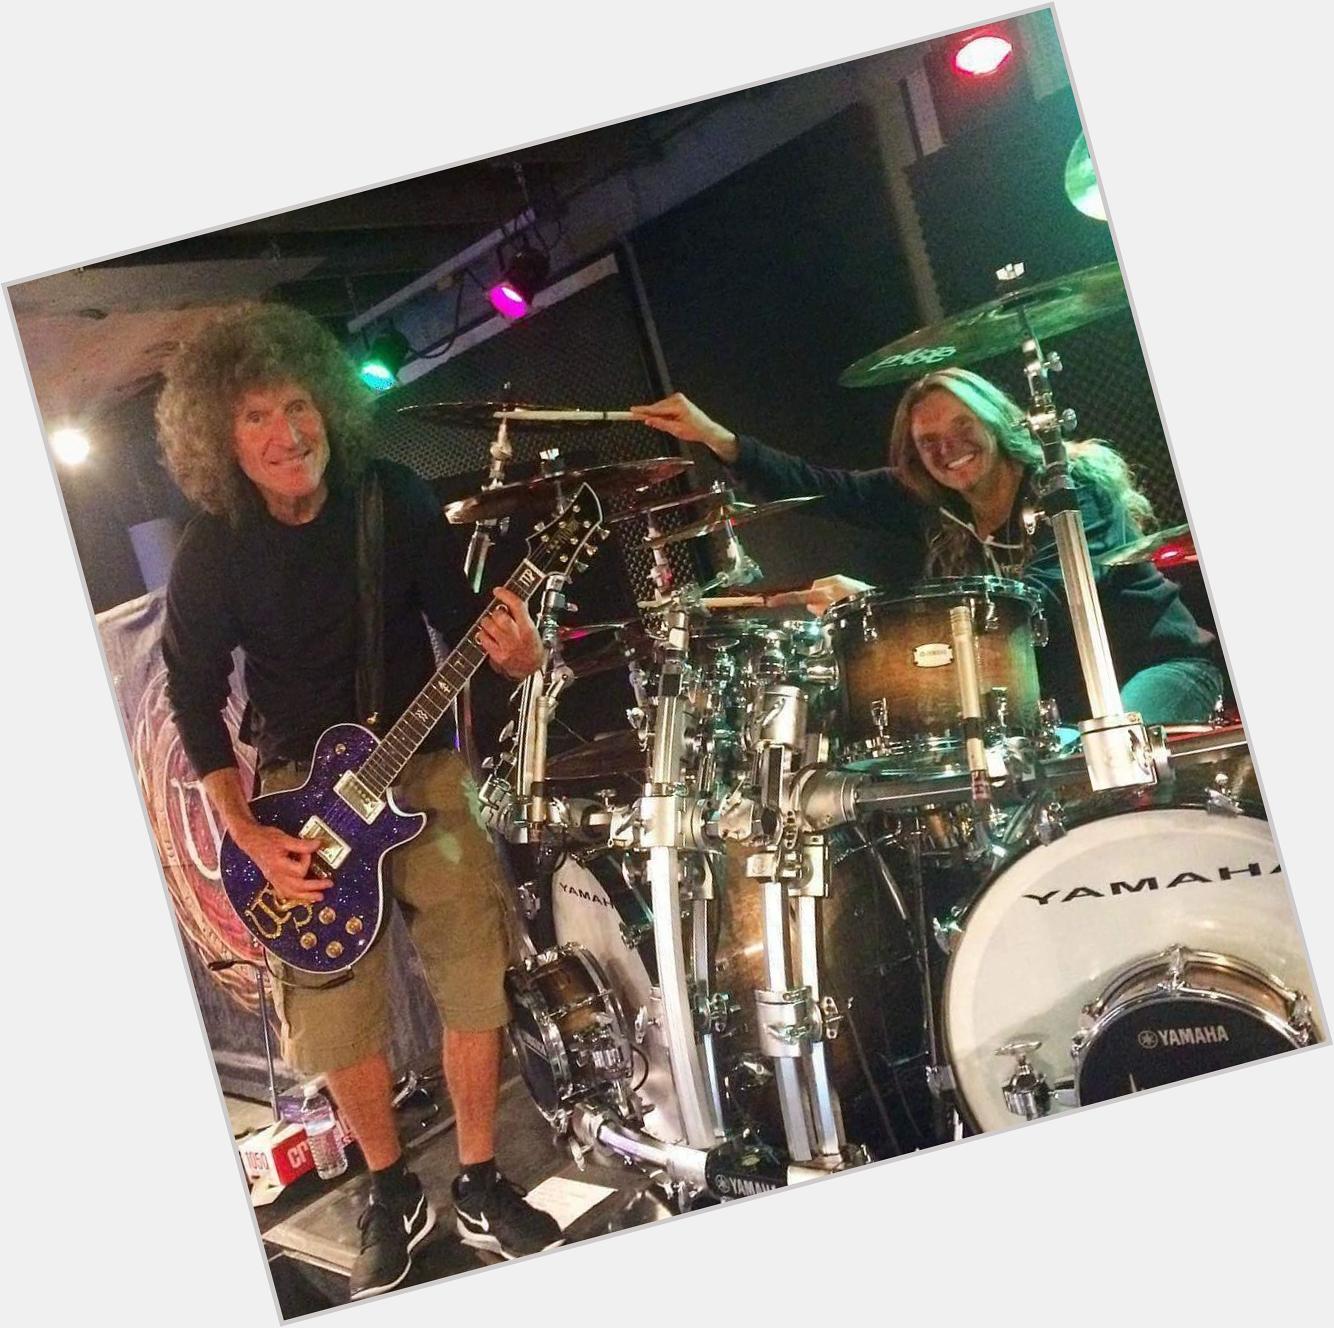 A HUGE Happy Birthday Shout Out To Dear Brother Tommy Aldridge of Whitesnake!!!
CHEERS!!!
All The Best!!!         